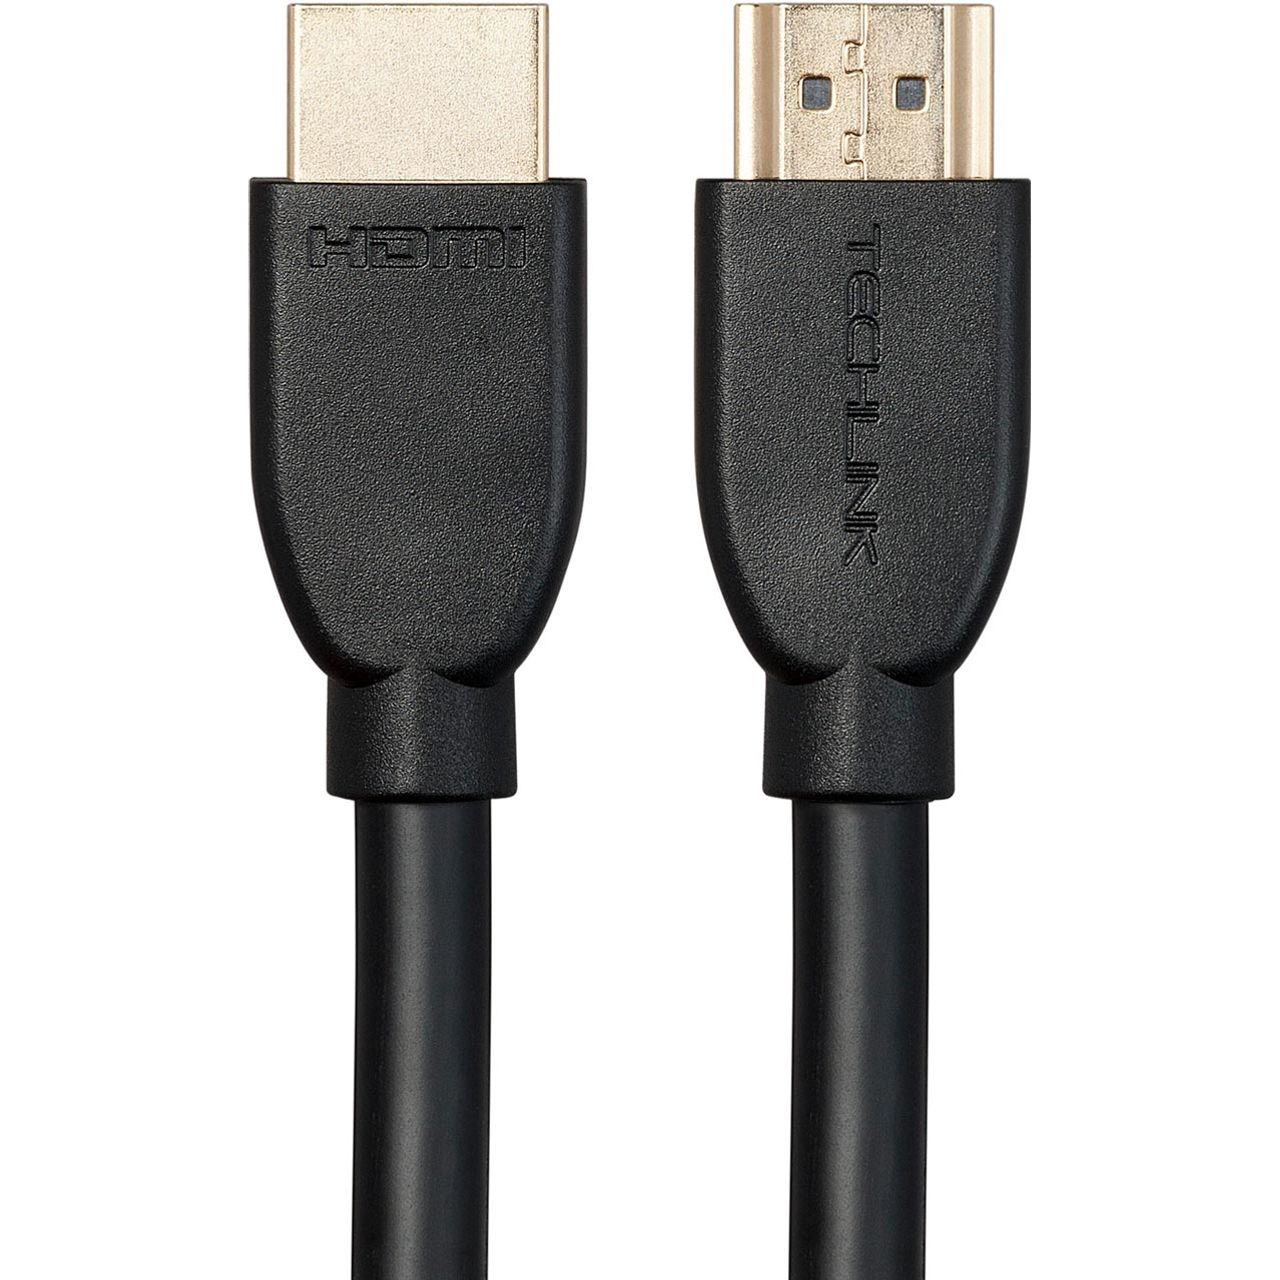 Techlink 103203 3m HDMI Cable Review